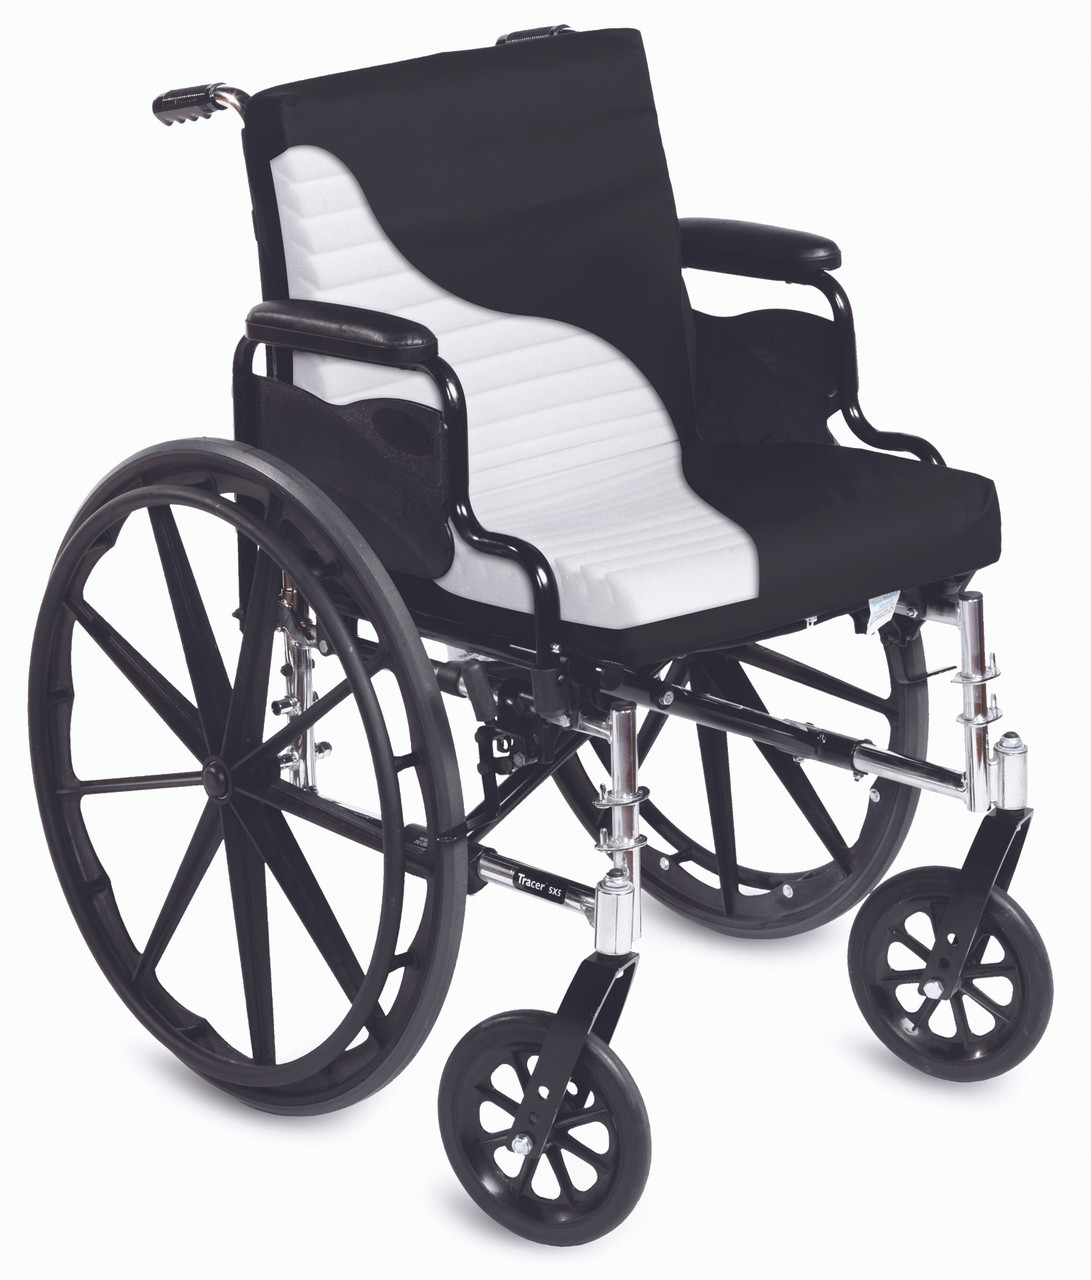 Short Wave Geri Cushion, Wheelchair Seat and Back Cushion, Removable  Zippered Cover, Reduces Shear, Fluid-Repellant Cover, Wipes clean, Easy to  Use. - Compression Medical Distributors, Inc.